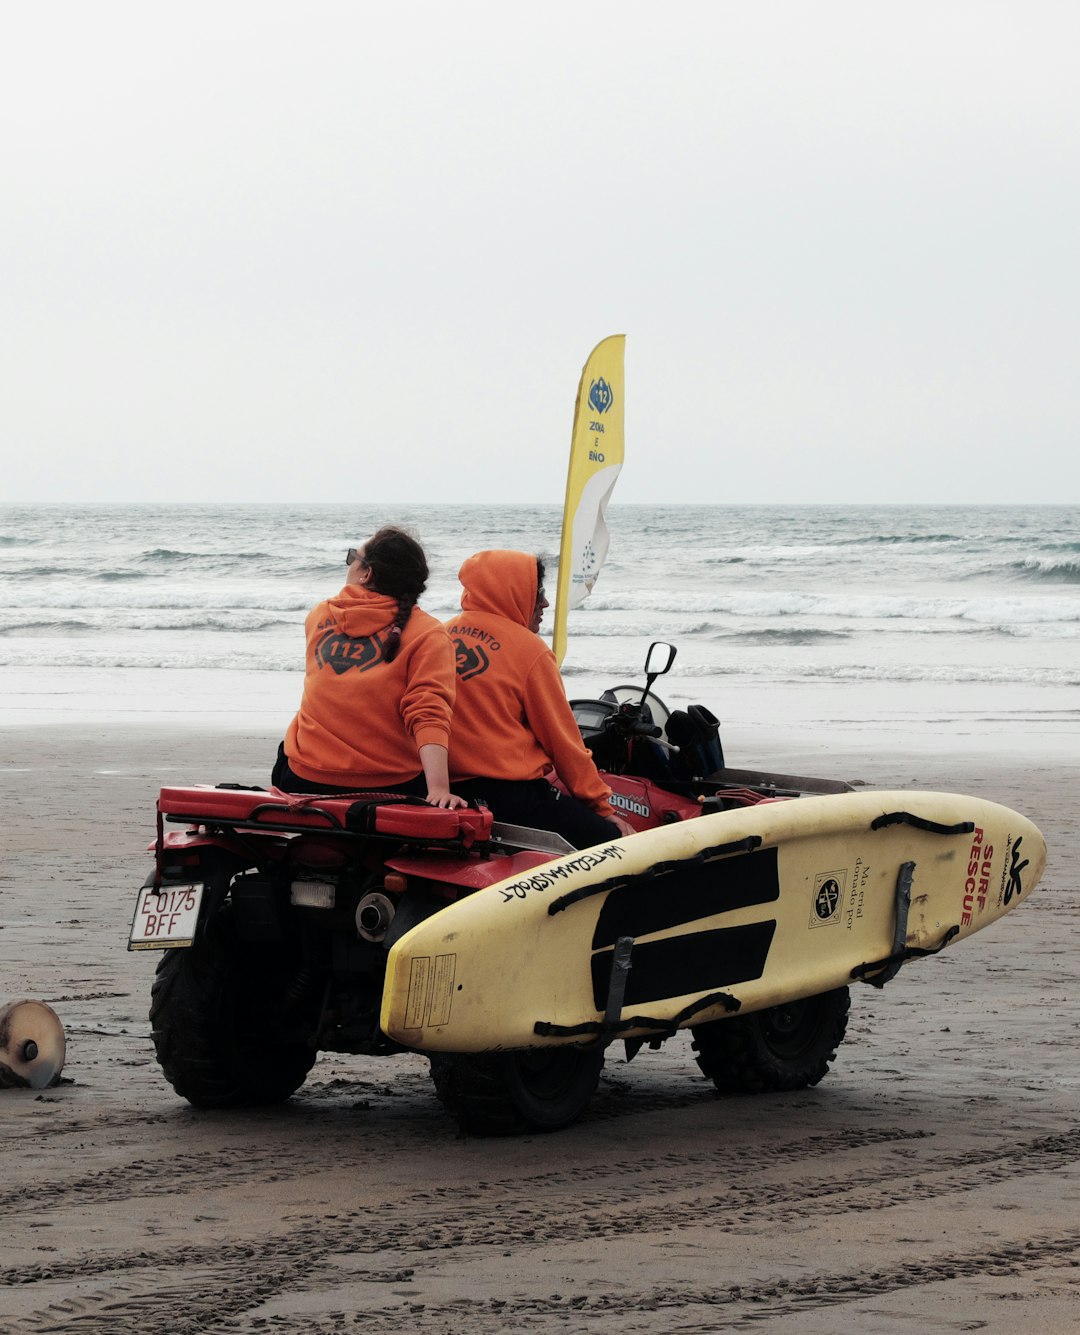 man in orange jacket sitting on yellow and black inflatable boat on beach during daytime